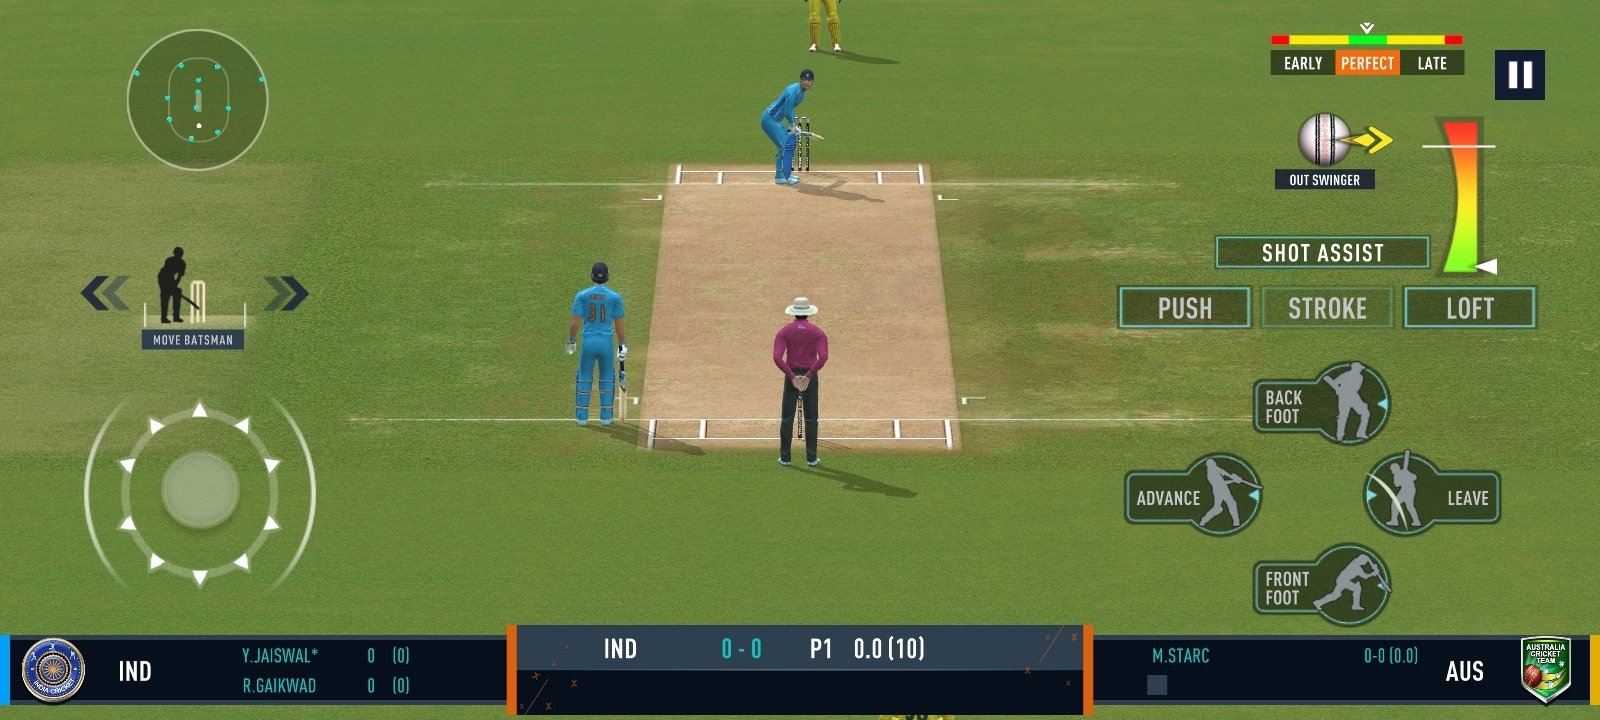 real cricket 18 apk for pc